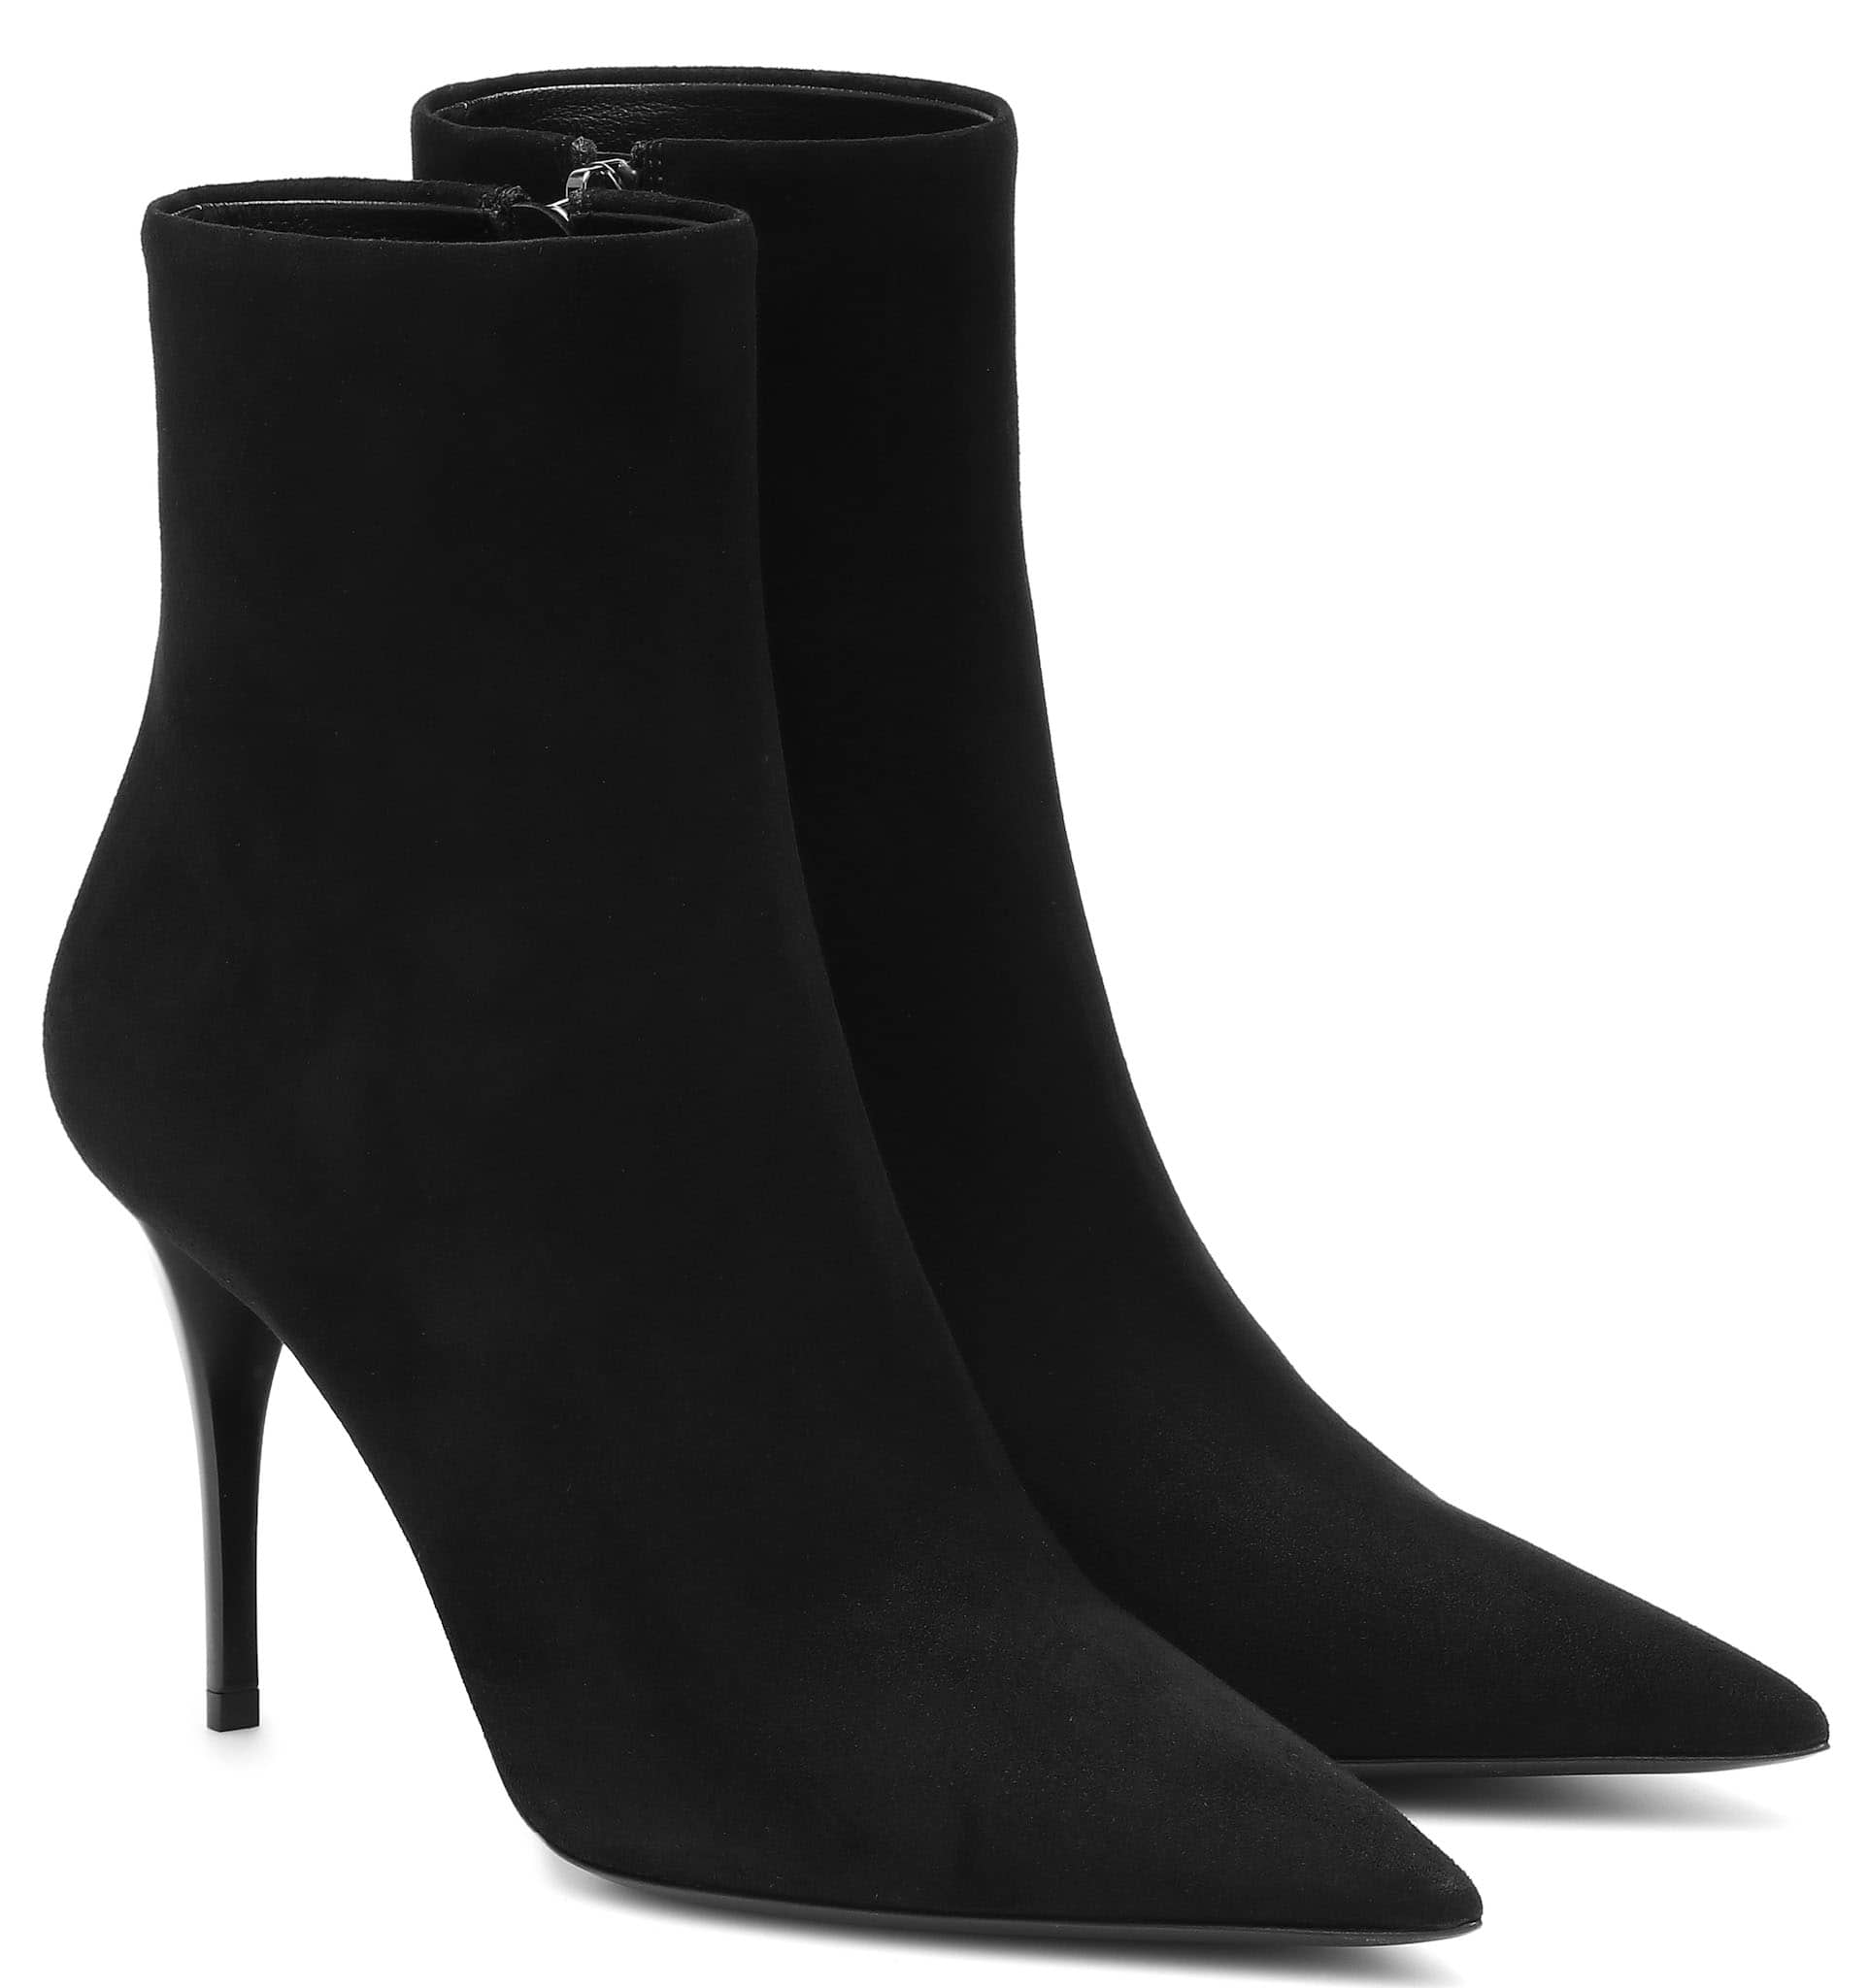 The Lexi suede boots have sharply pointed toes, side zips, and thin stiletto heels